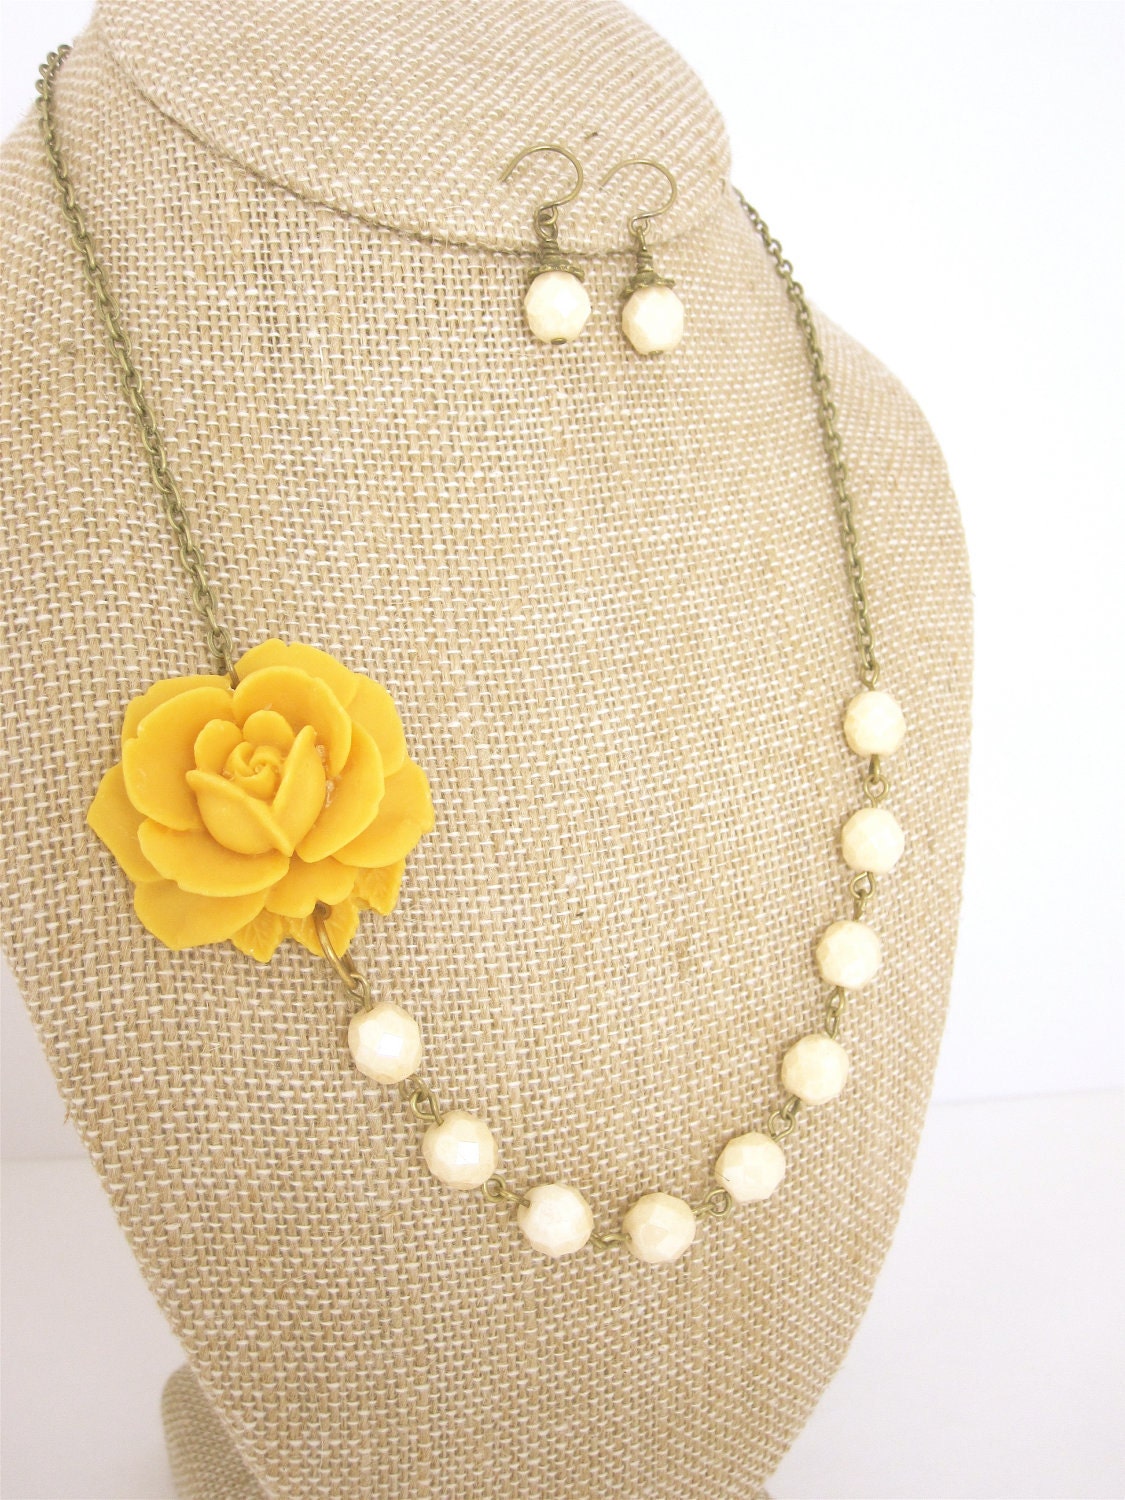 Flower Necklace - Mustard Yellow Rose and Ivory Glass Beads Necklace with Matching Earrings Set